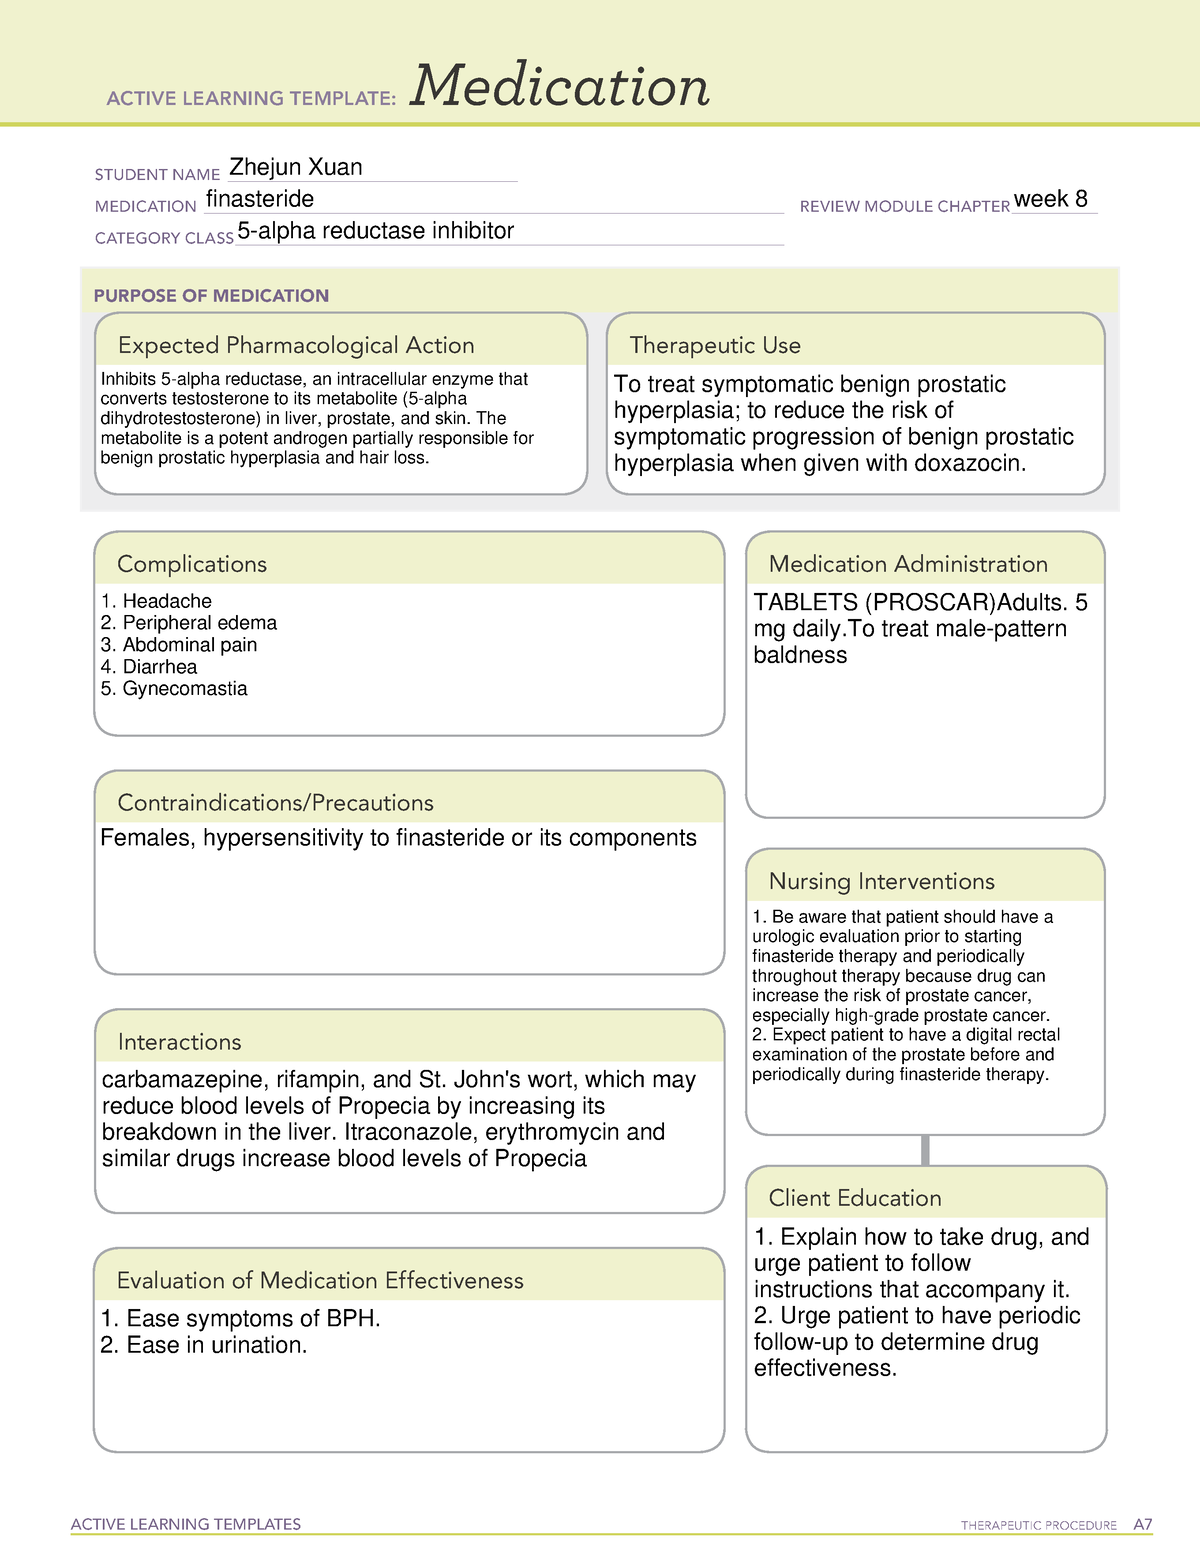 finasteride-med-card-active-learning-templates-therapeutic